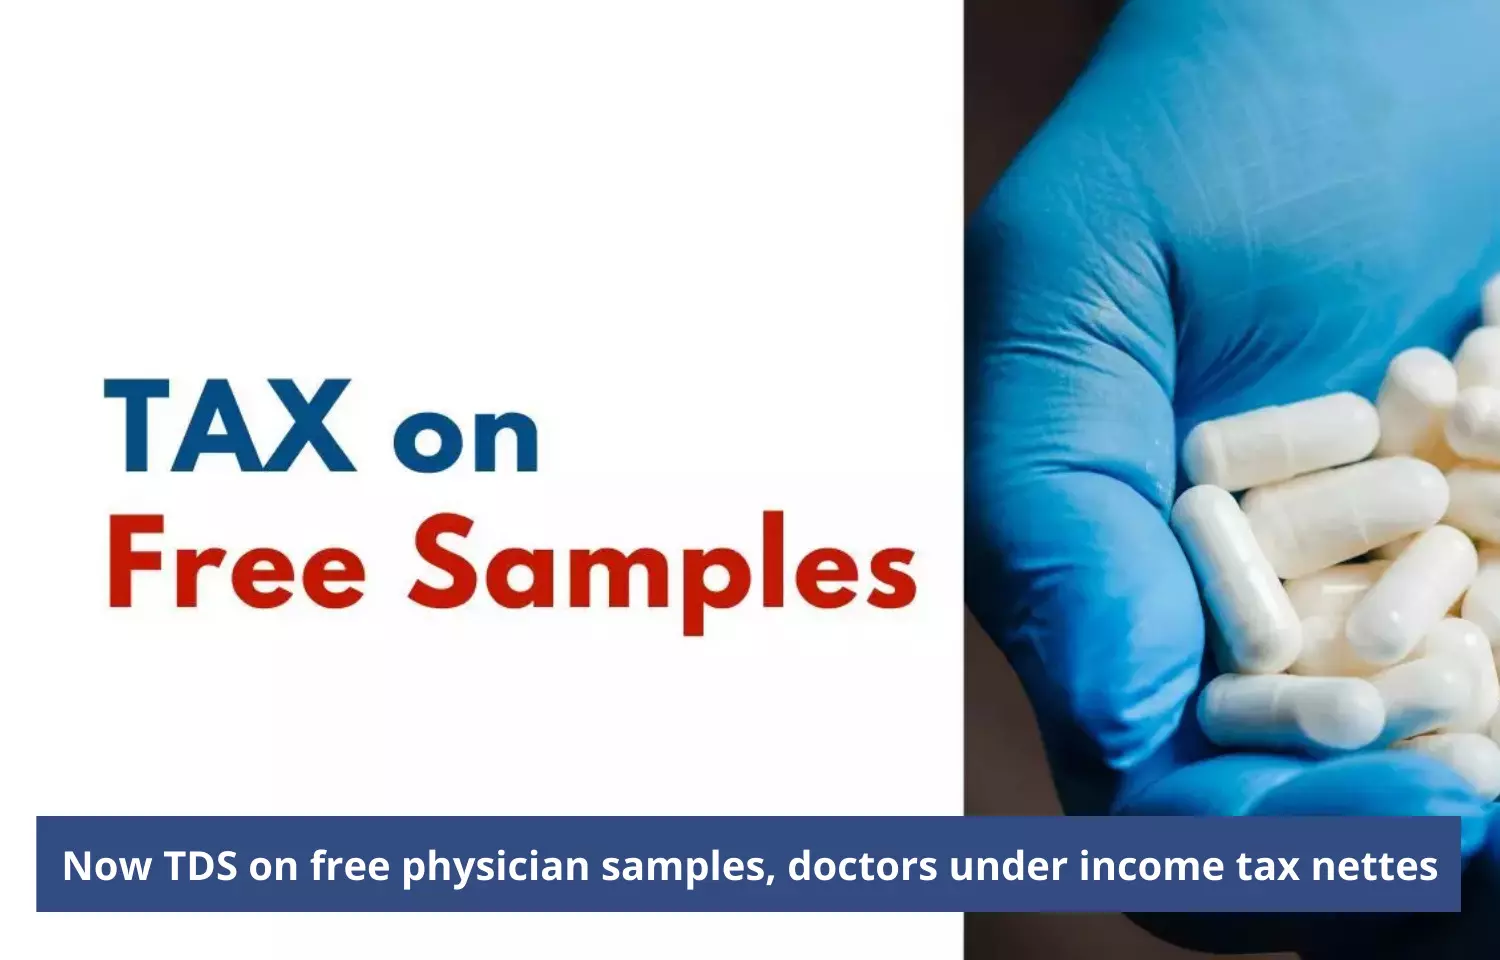 Now TDS on free physician samples, doctors under income tax net